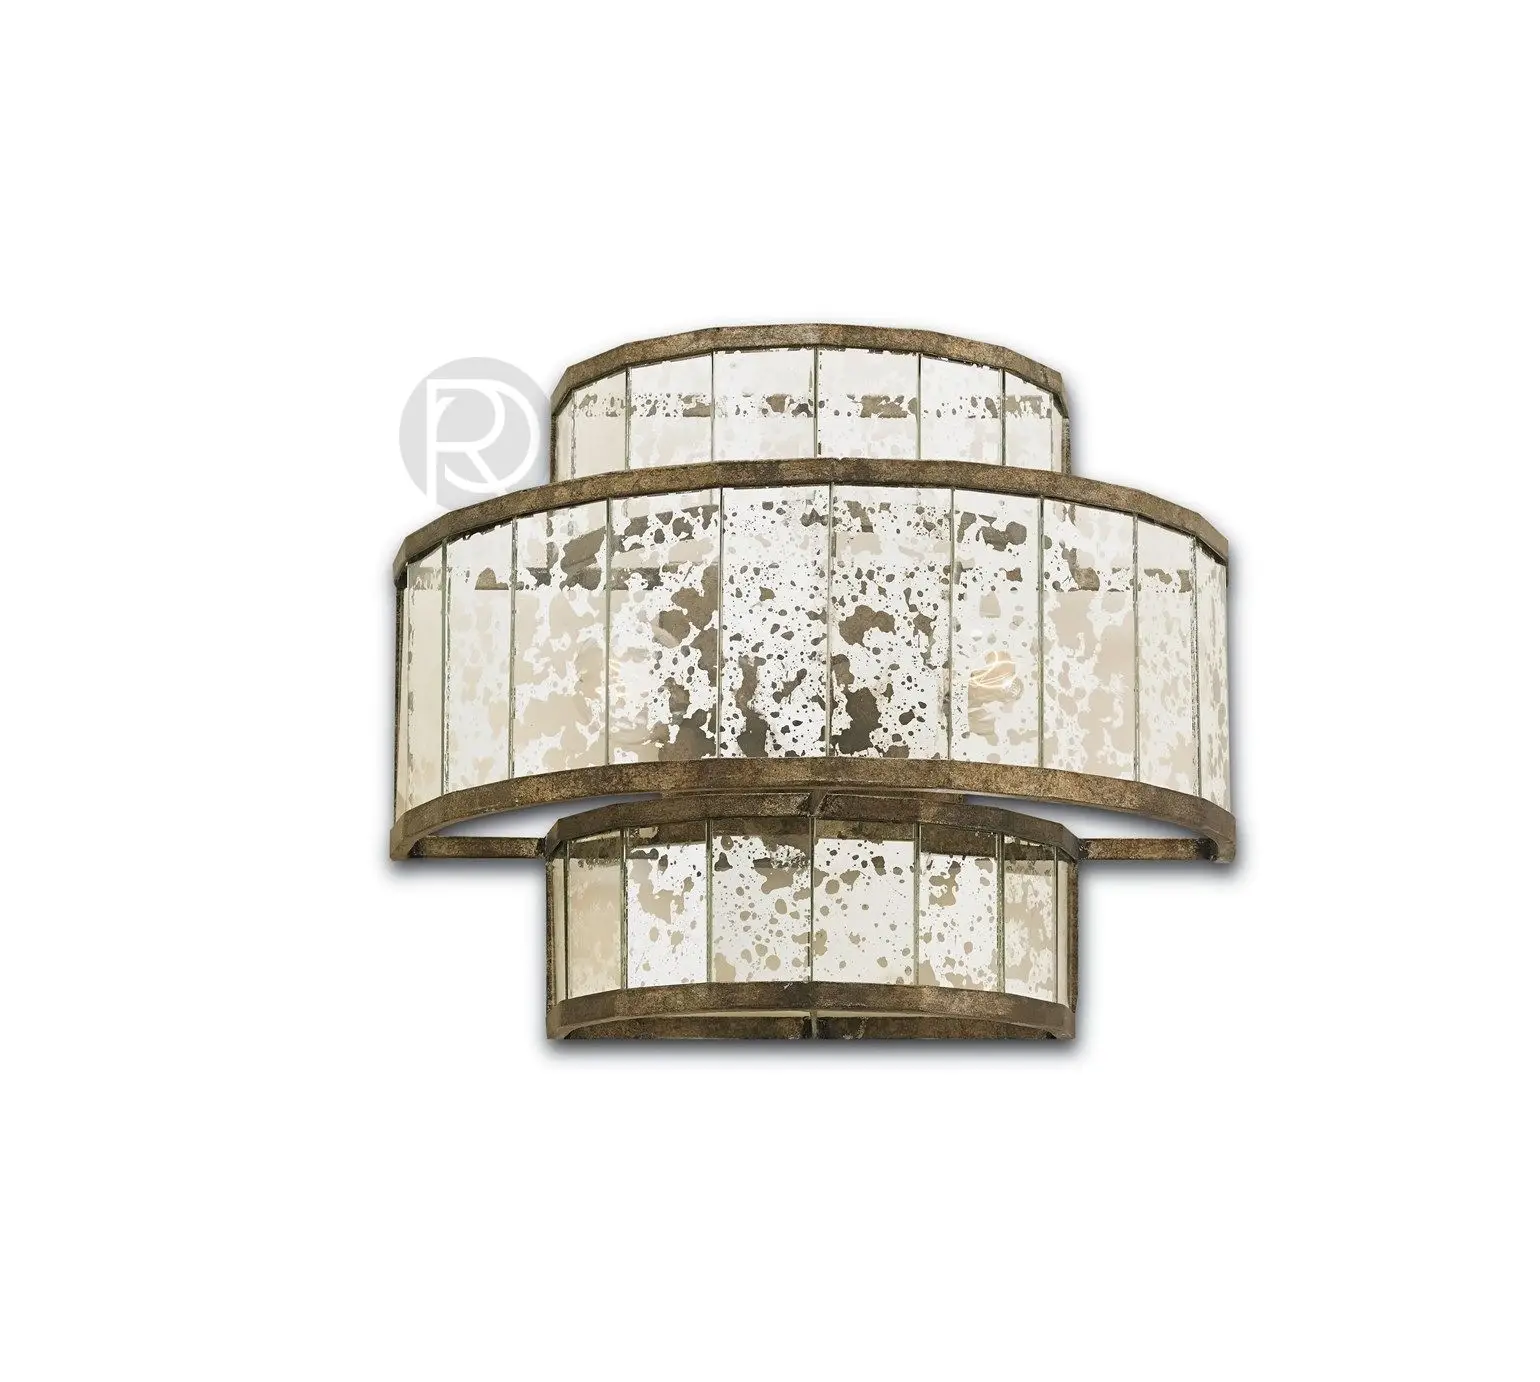 Wall lamp (Sconce) FANTINE by Currey & Company